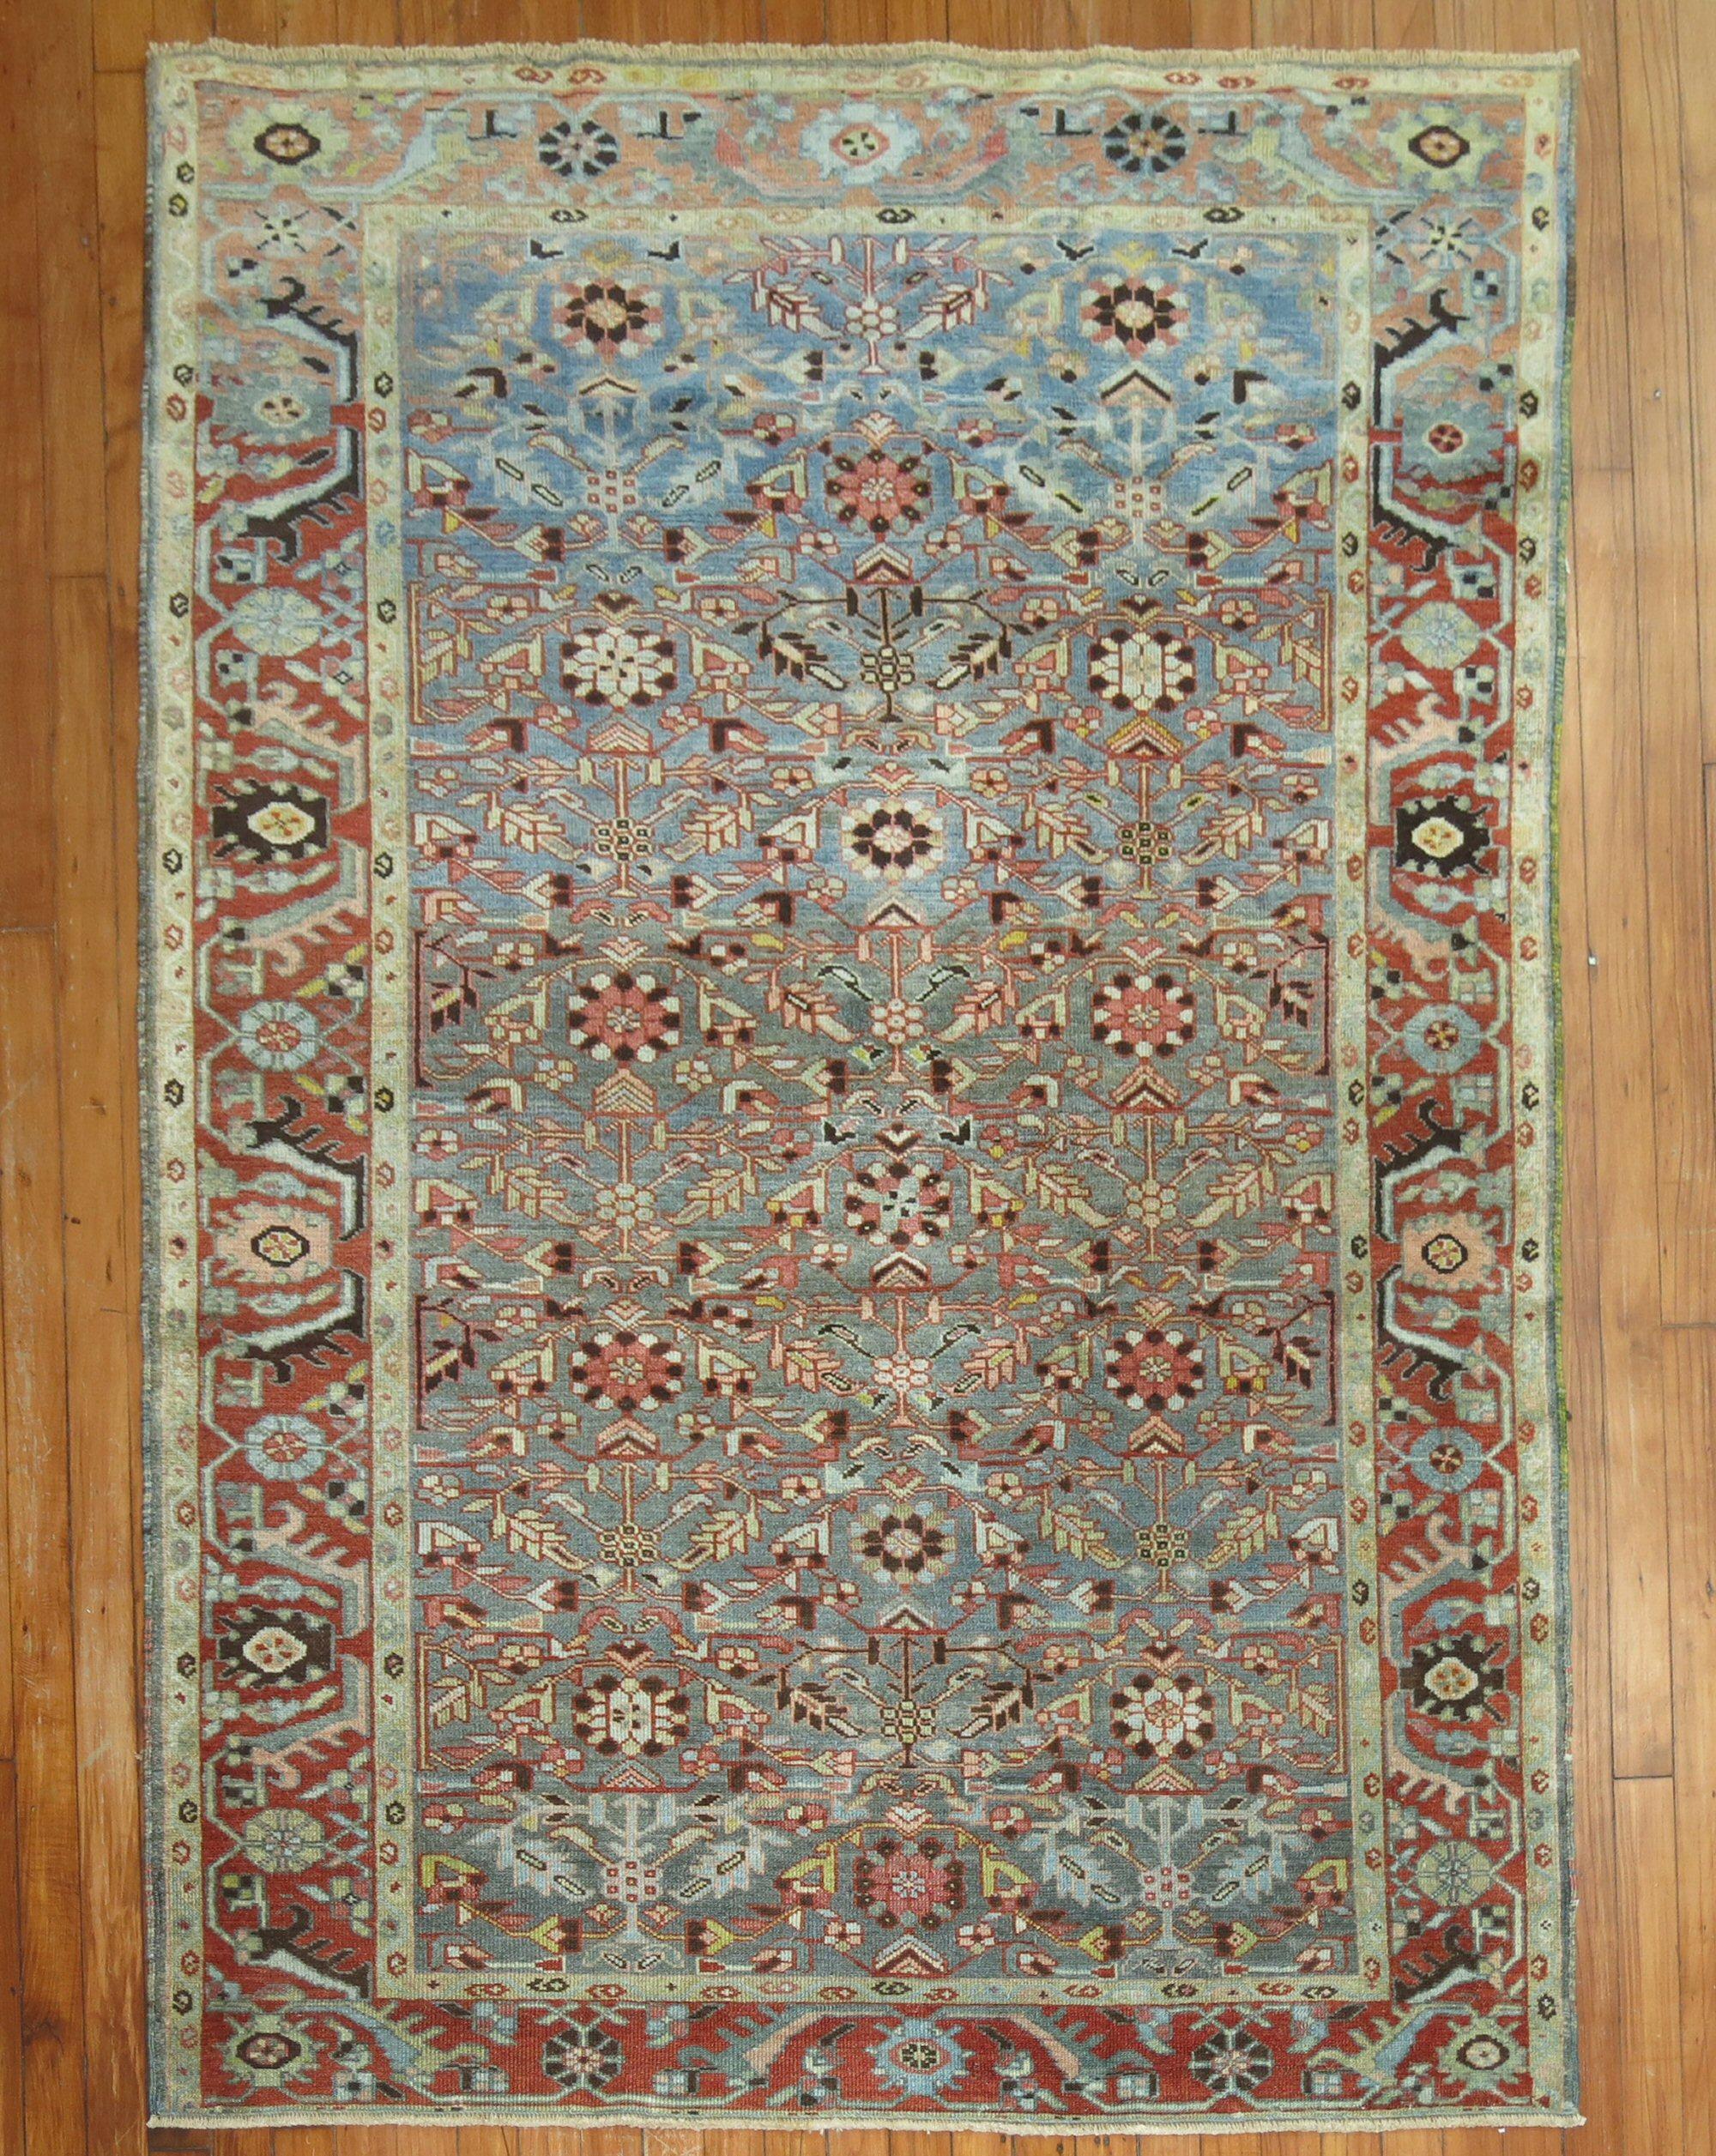 Antique High Decorative Persian Malayer rug from the early 20th century 

Measures: 4'5'' x 6'6''.